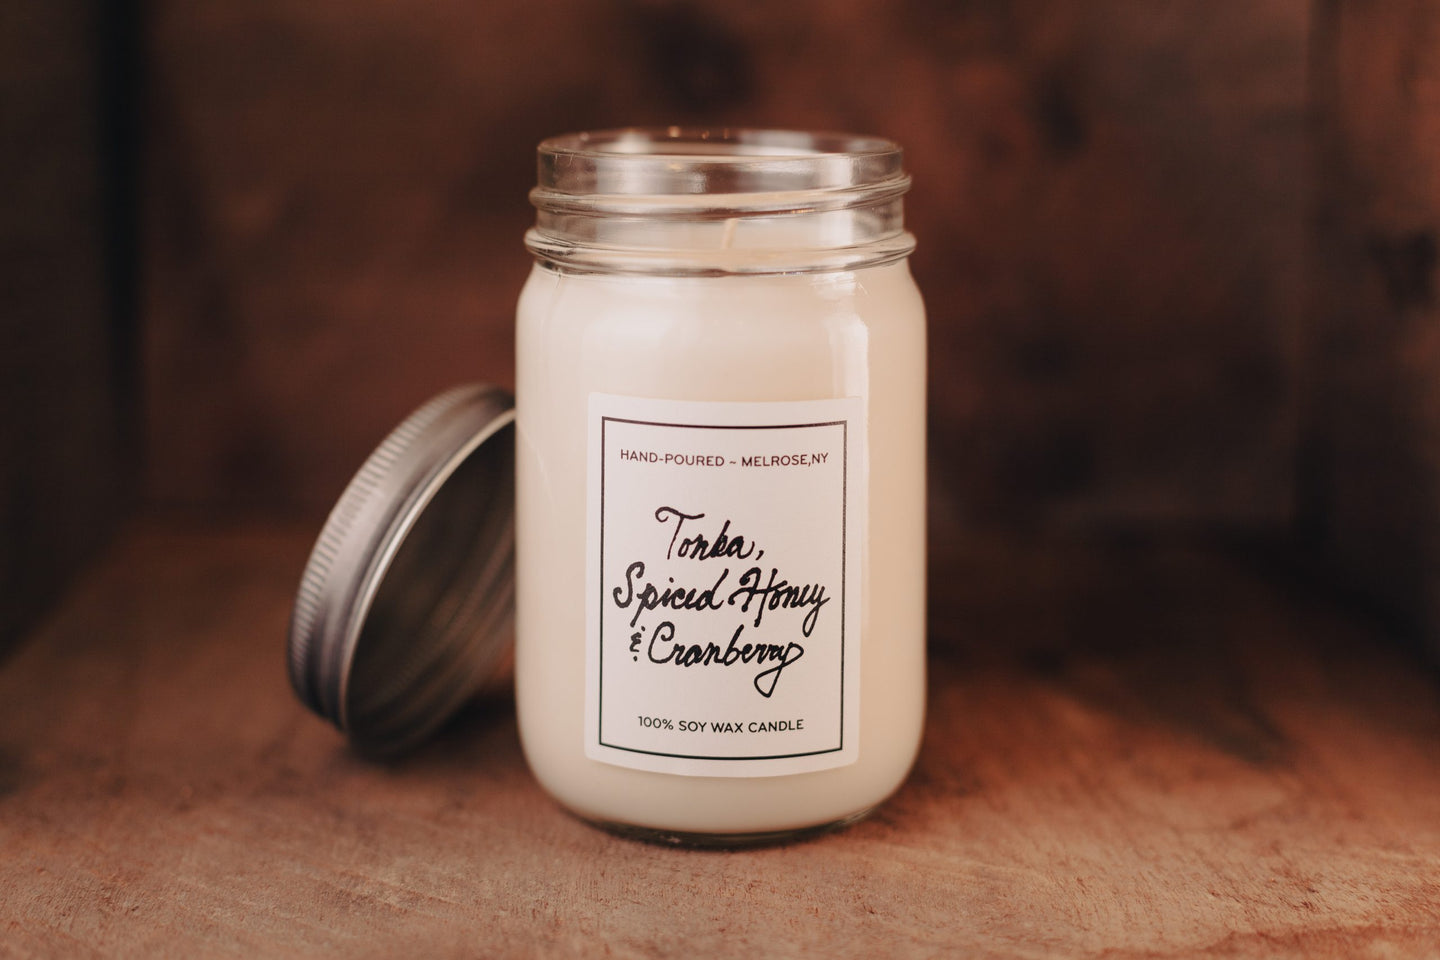 Tonka, Spiced Honey, and Cranberry Soy Candle